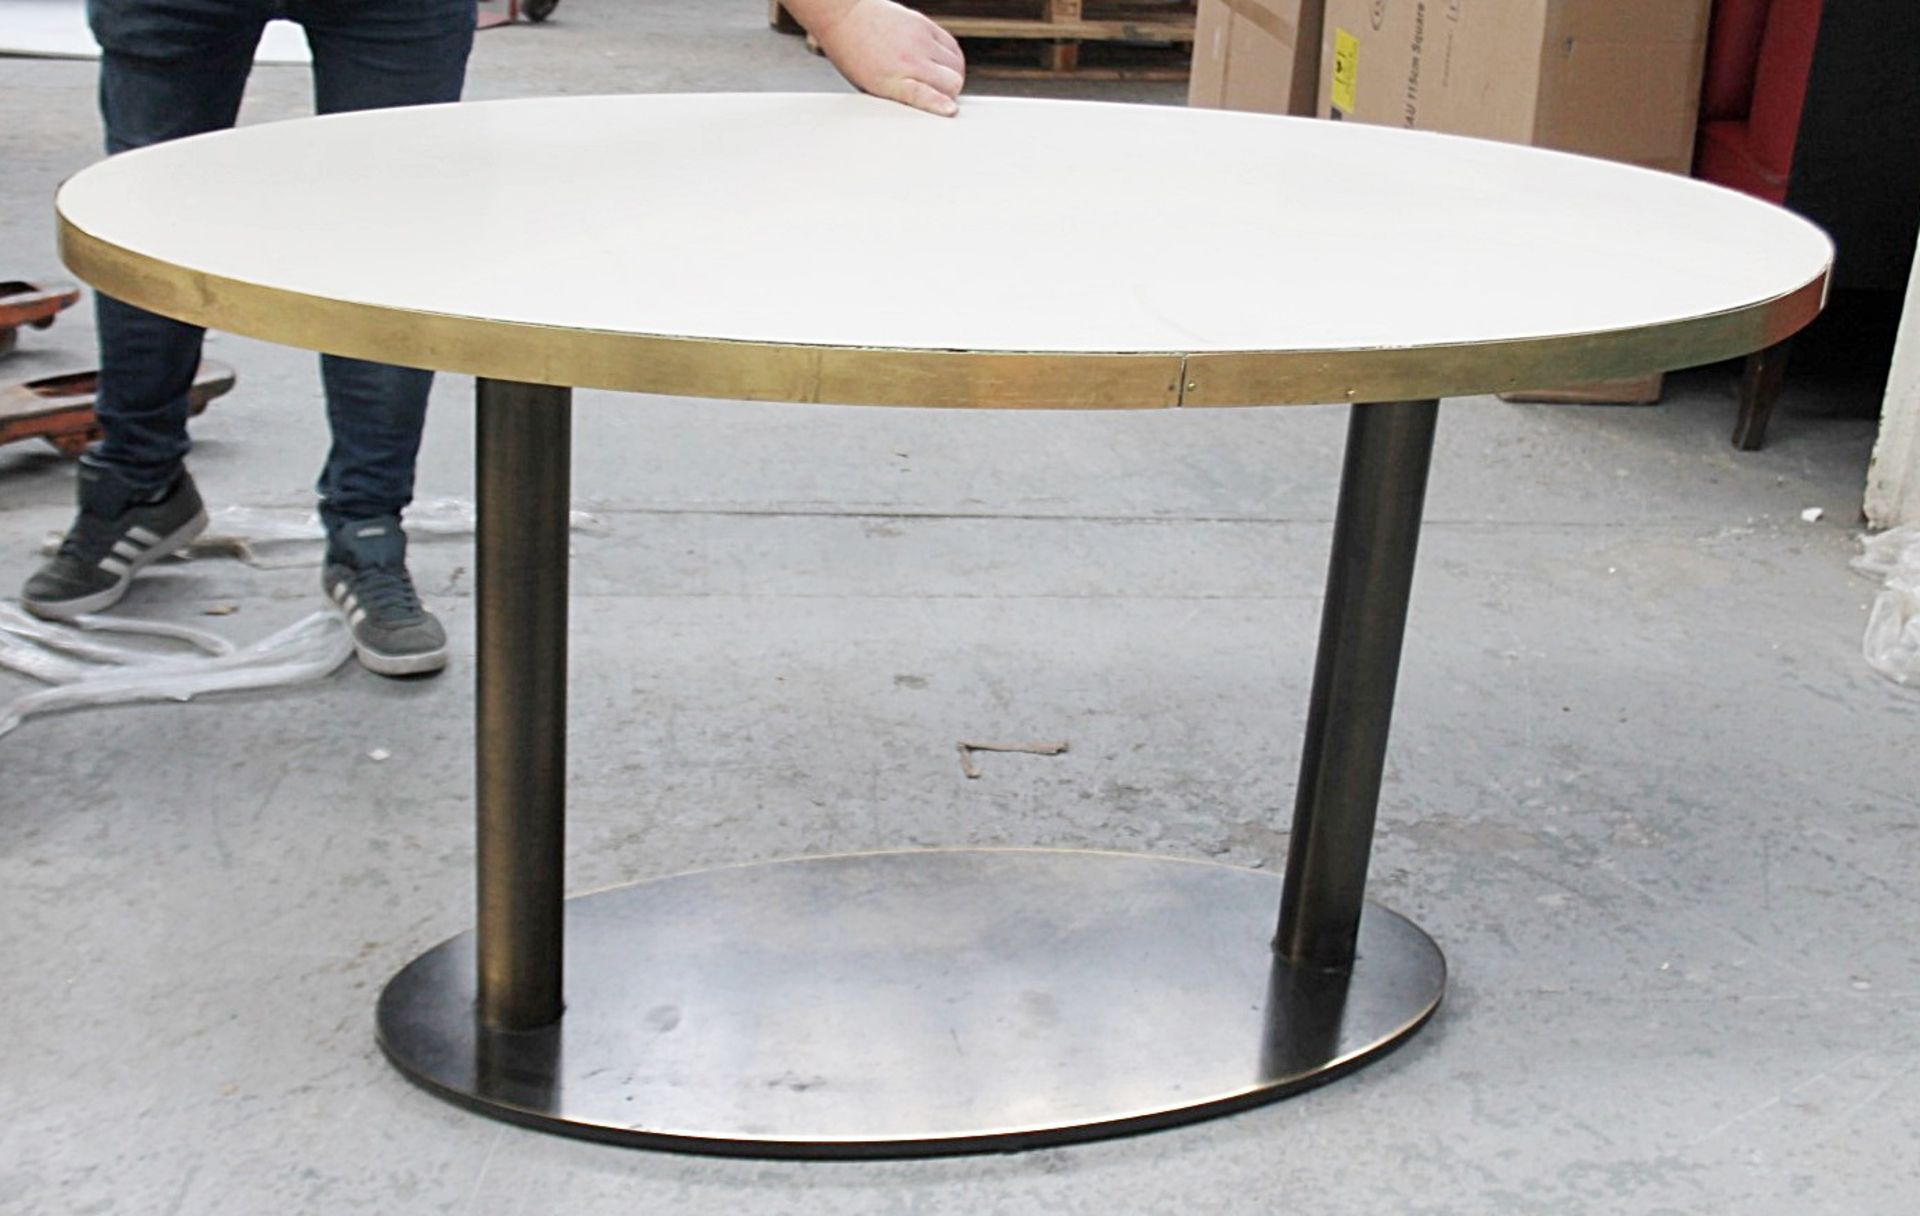 A Pair Of Oval Commercial Bistro Tables With A Brass Trim And Sturdy Metal Bases *Read Description* - Image 7 of 7